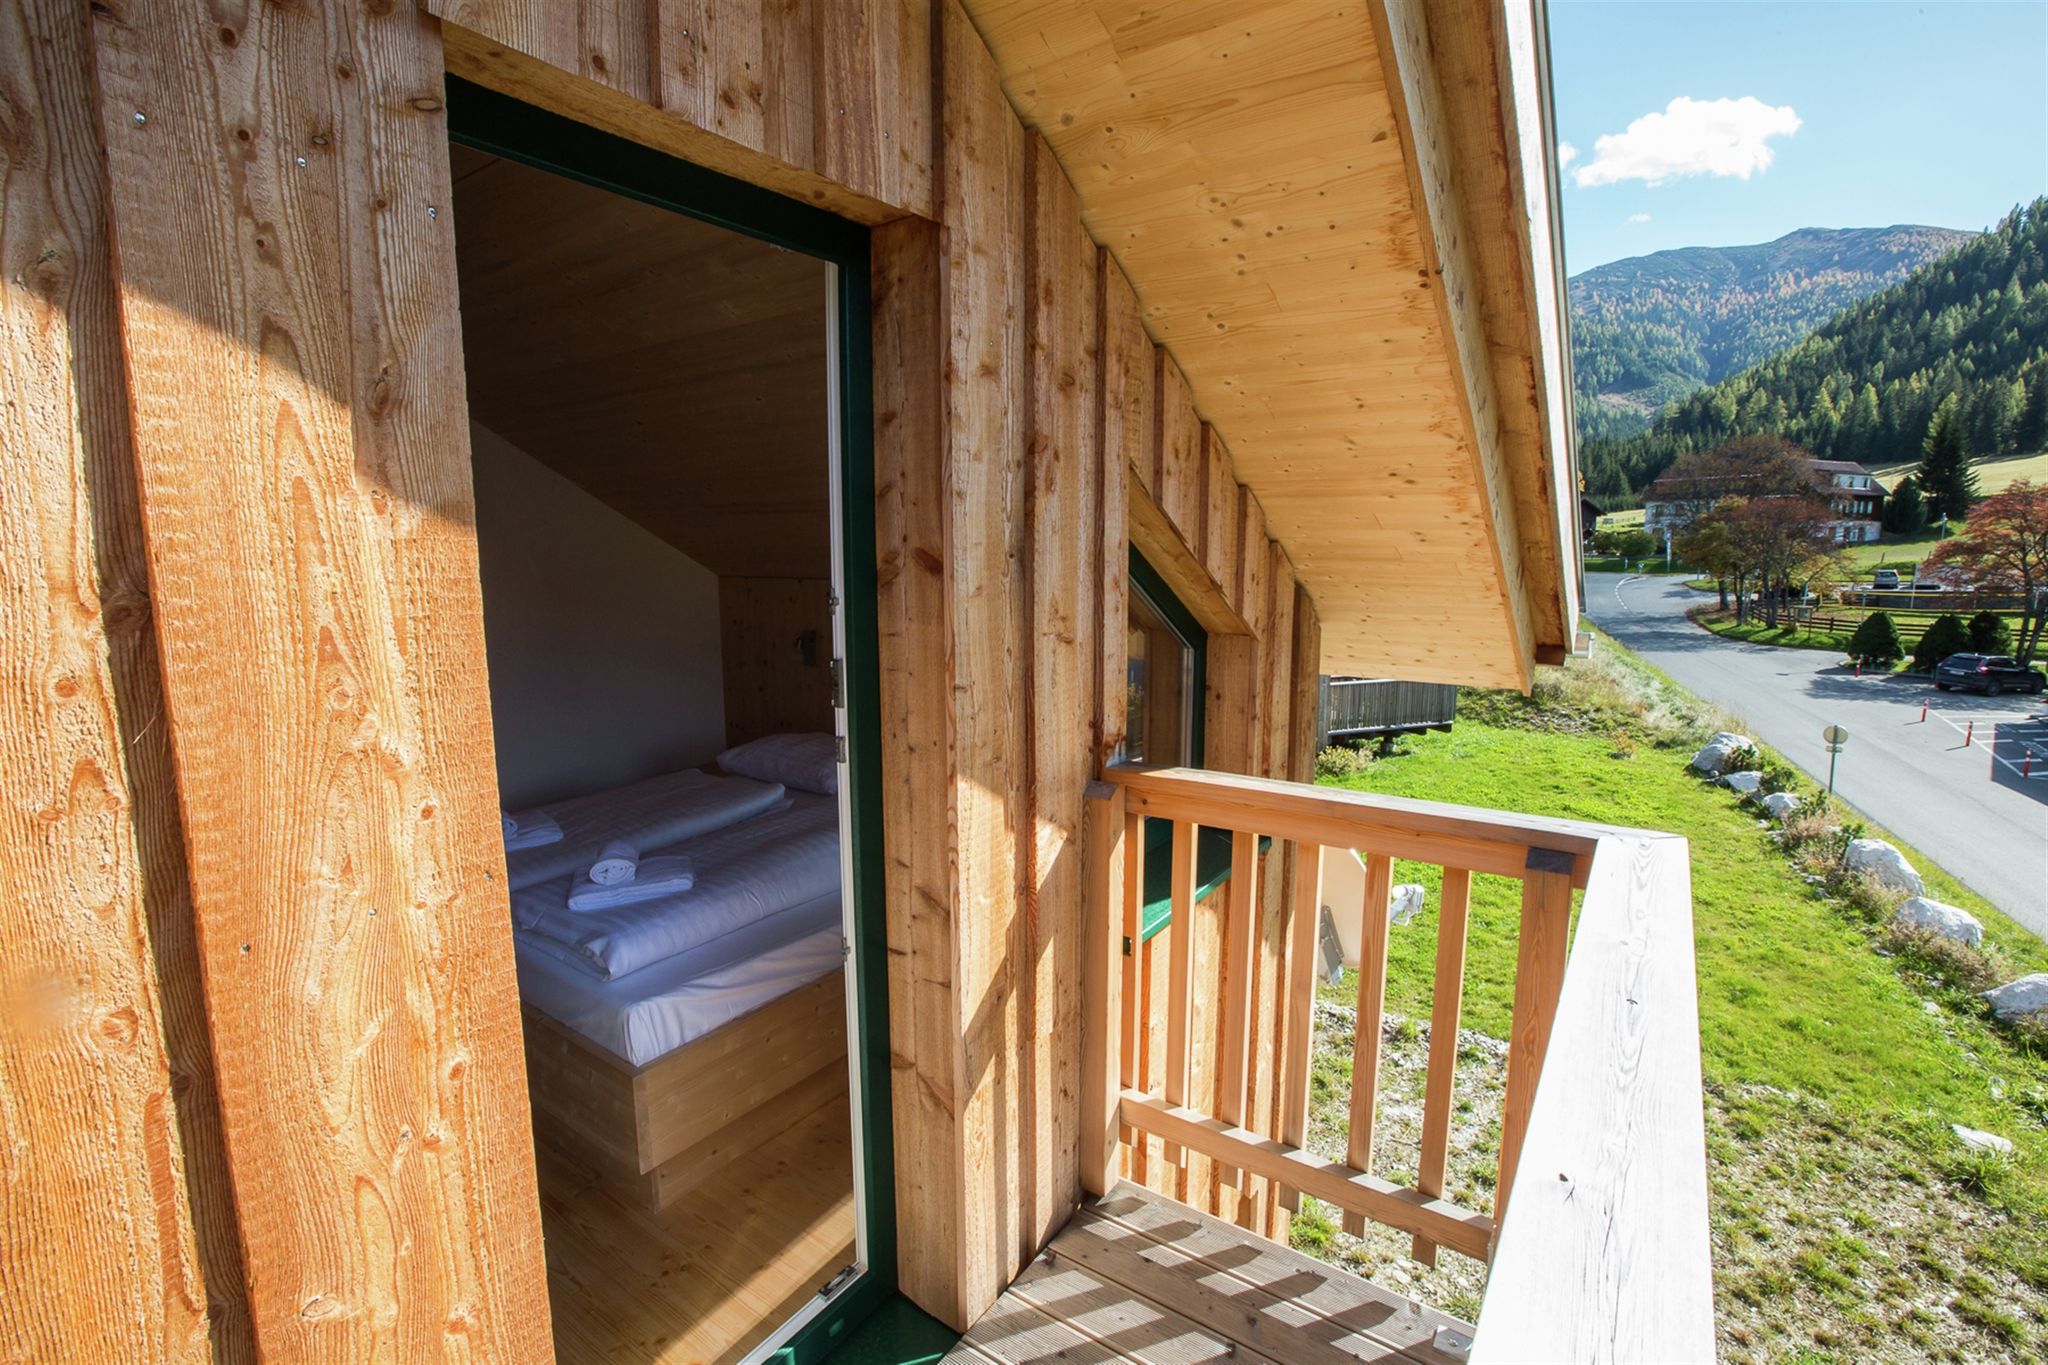 Holiday home with terrace and IR sauna in Styria